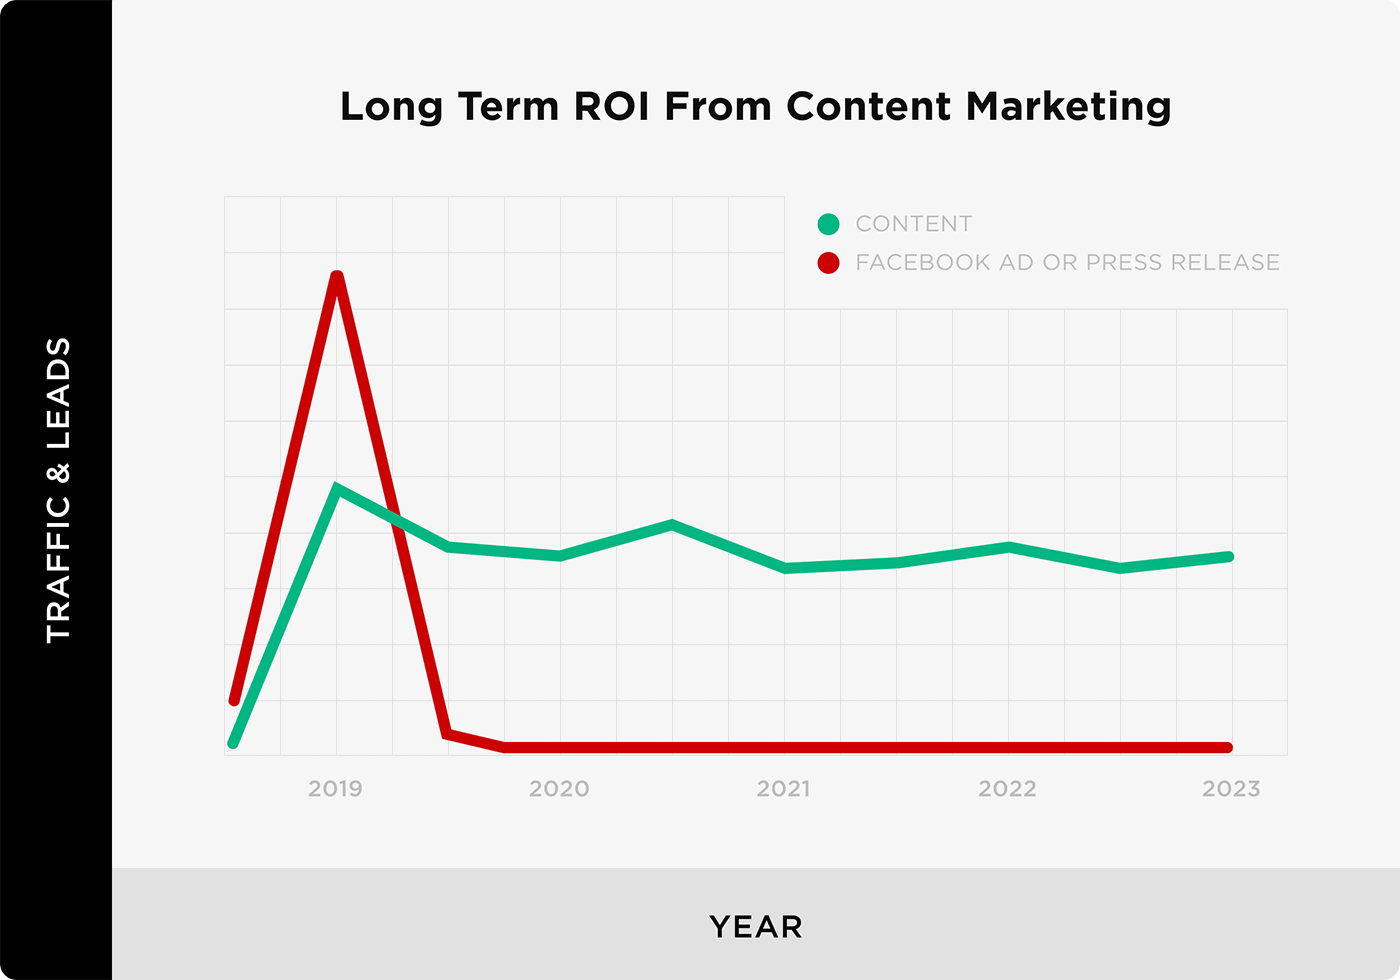 Long term ROI from content marketing